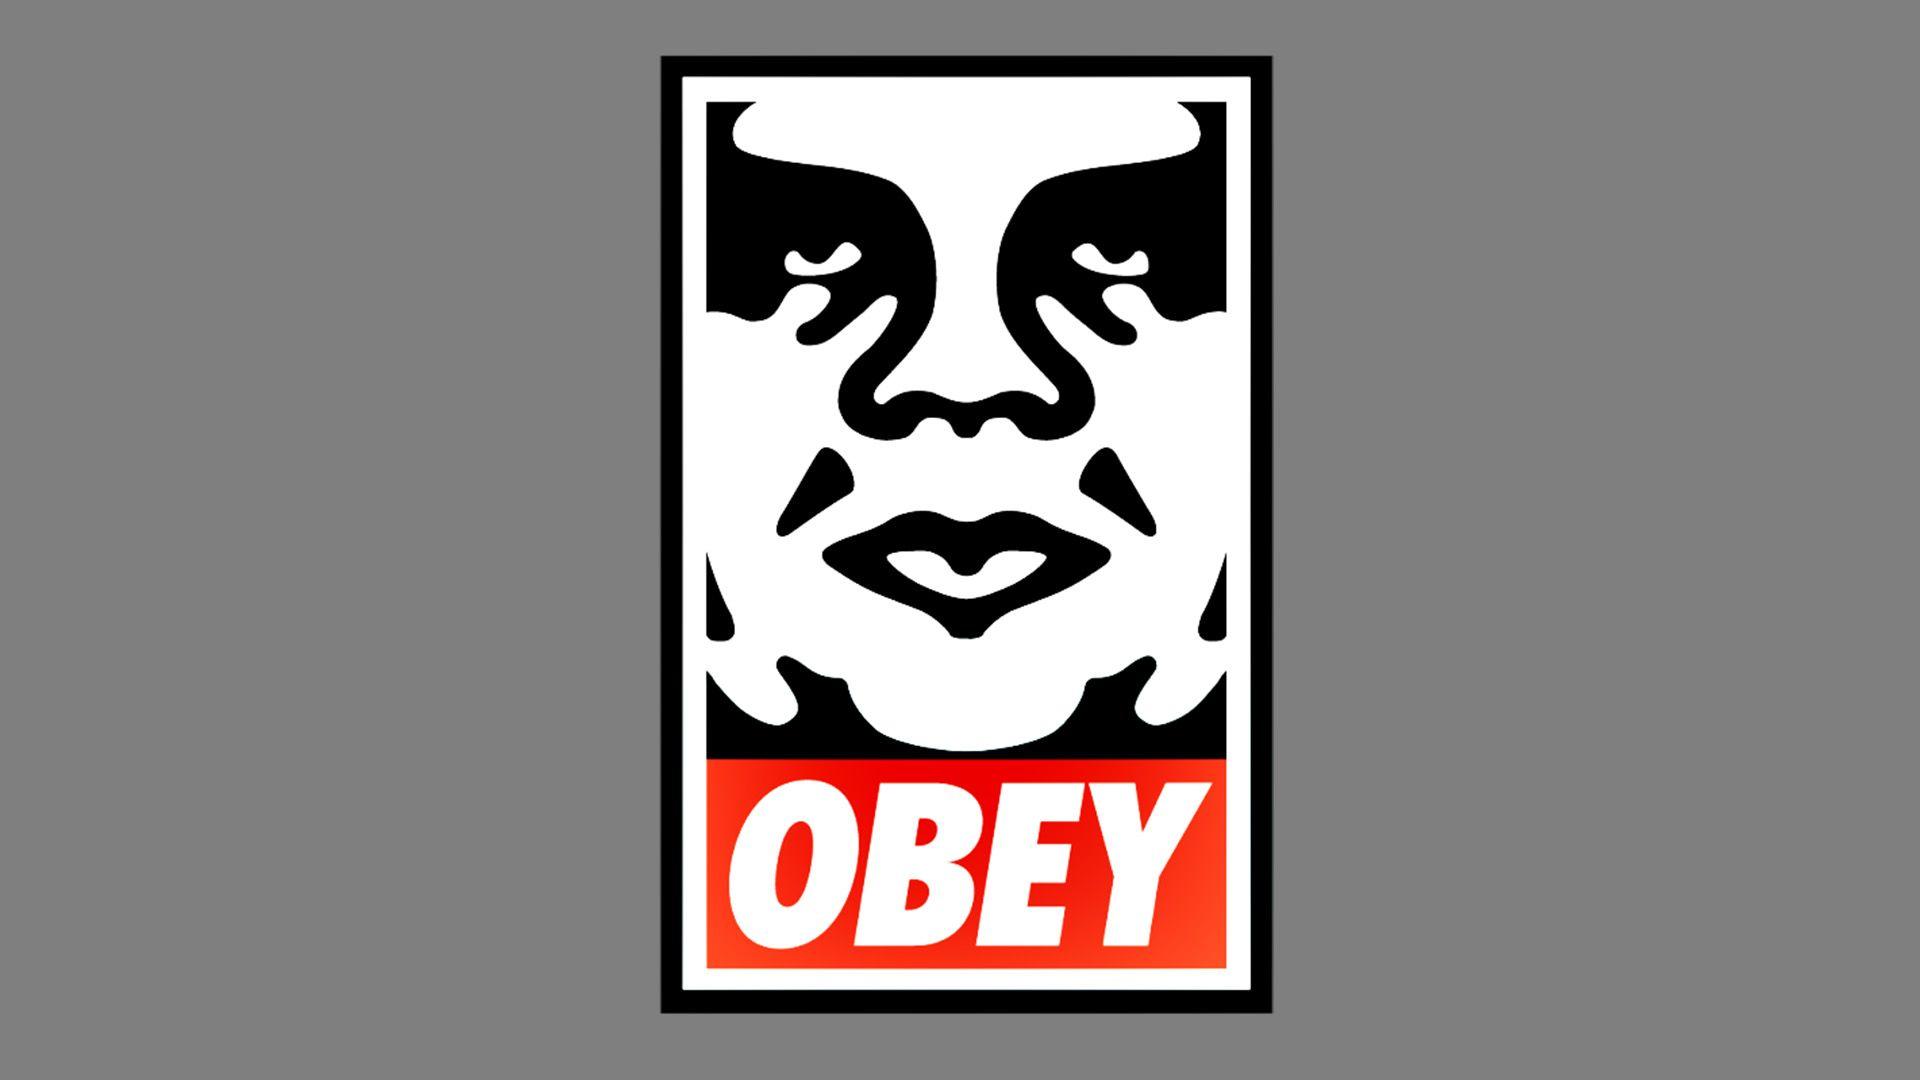 Obey Brand Logo - Obey Logo, Obey Symbol, Meaning, History and Evolution